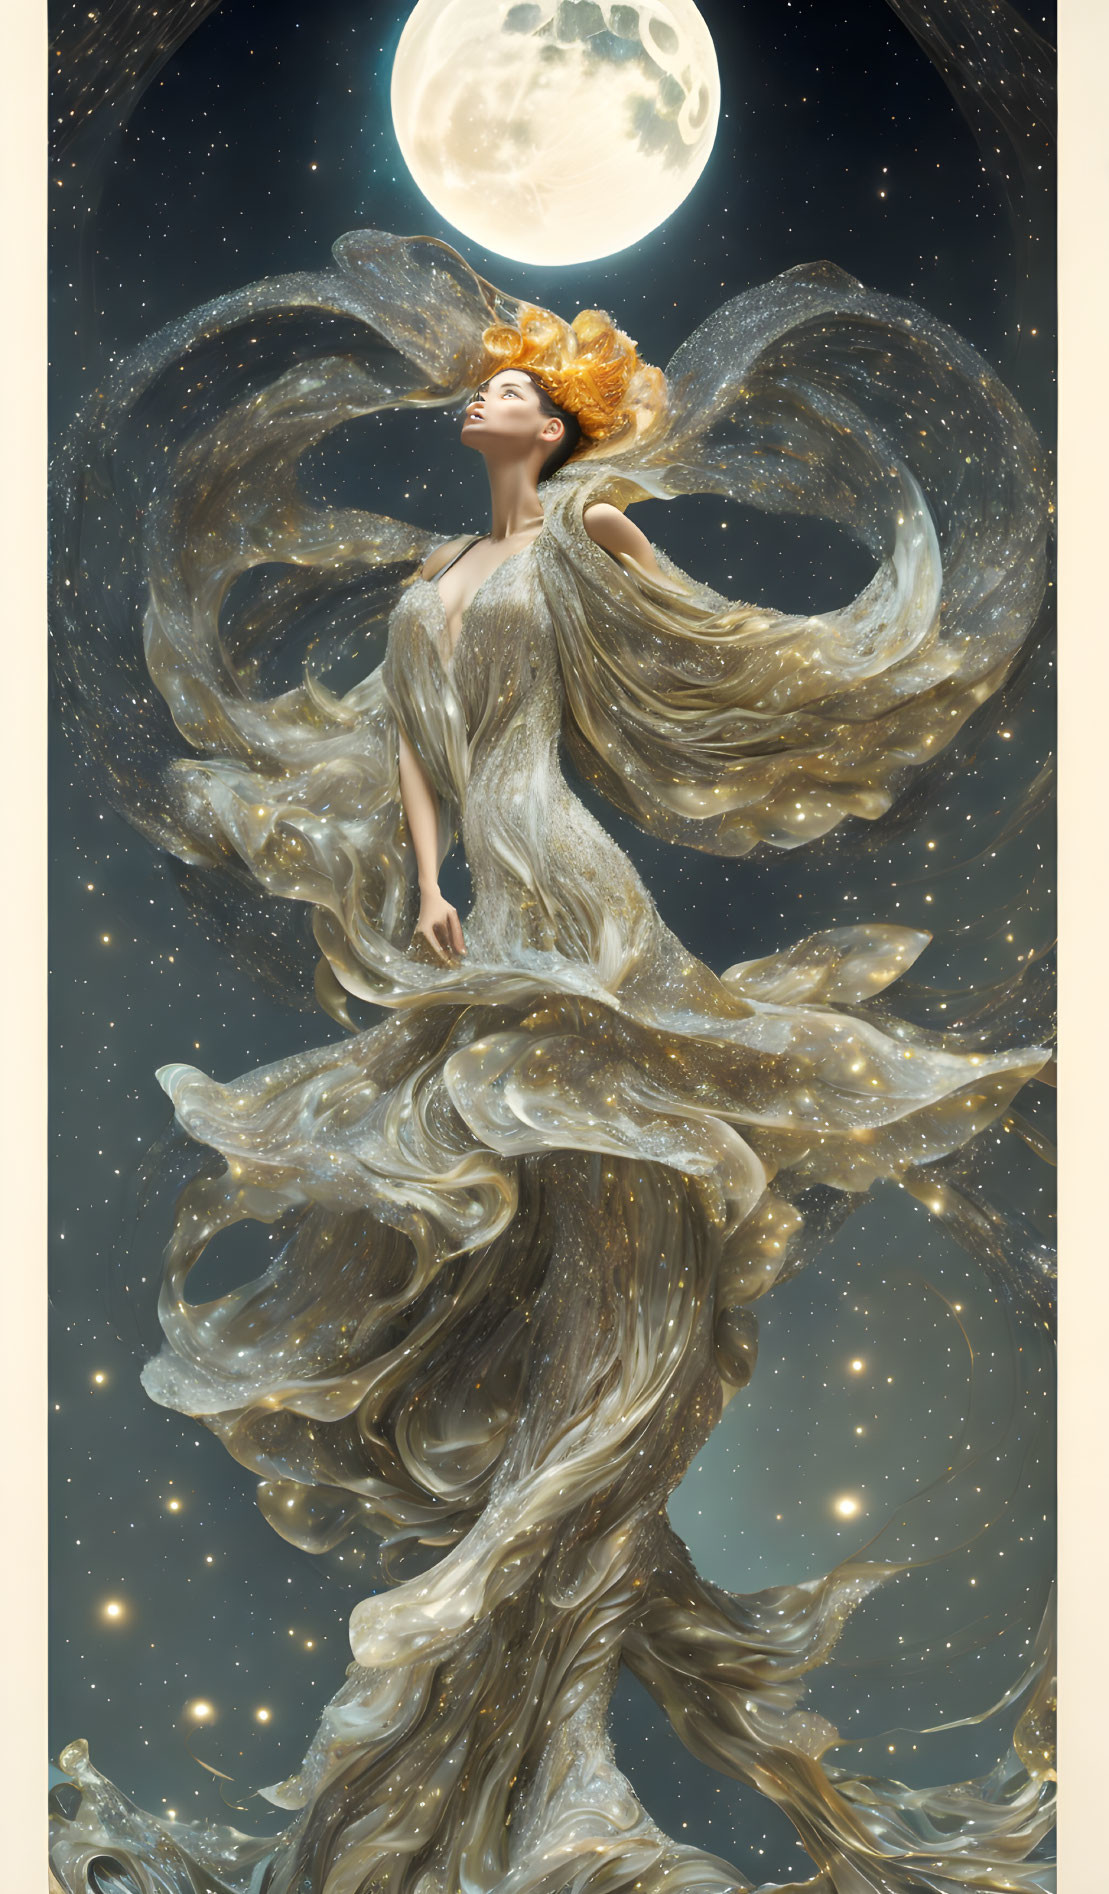 Ethereal woman in flowing attire gazes at full moon in starry sky